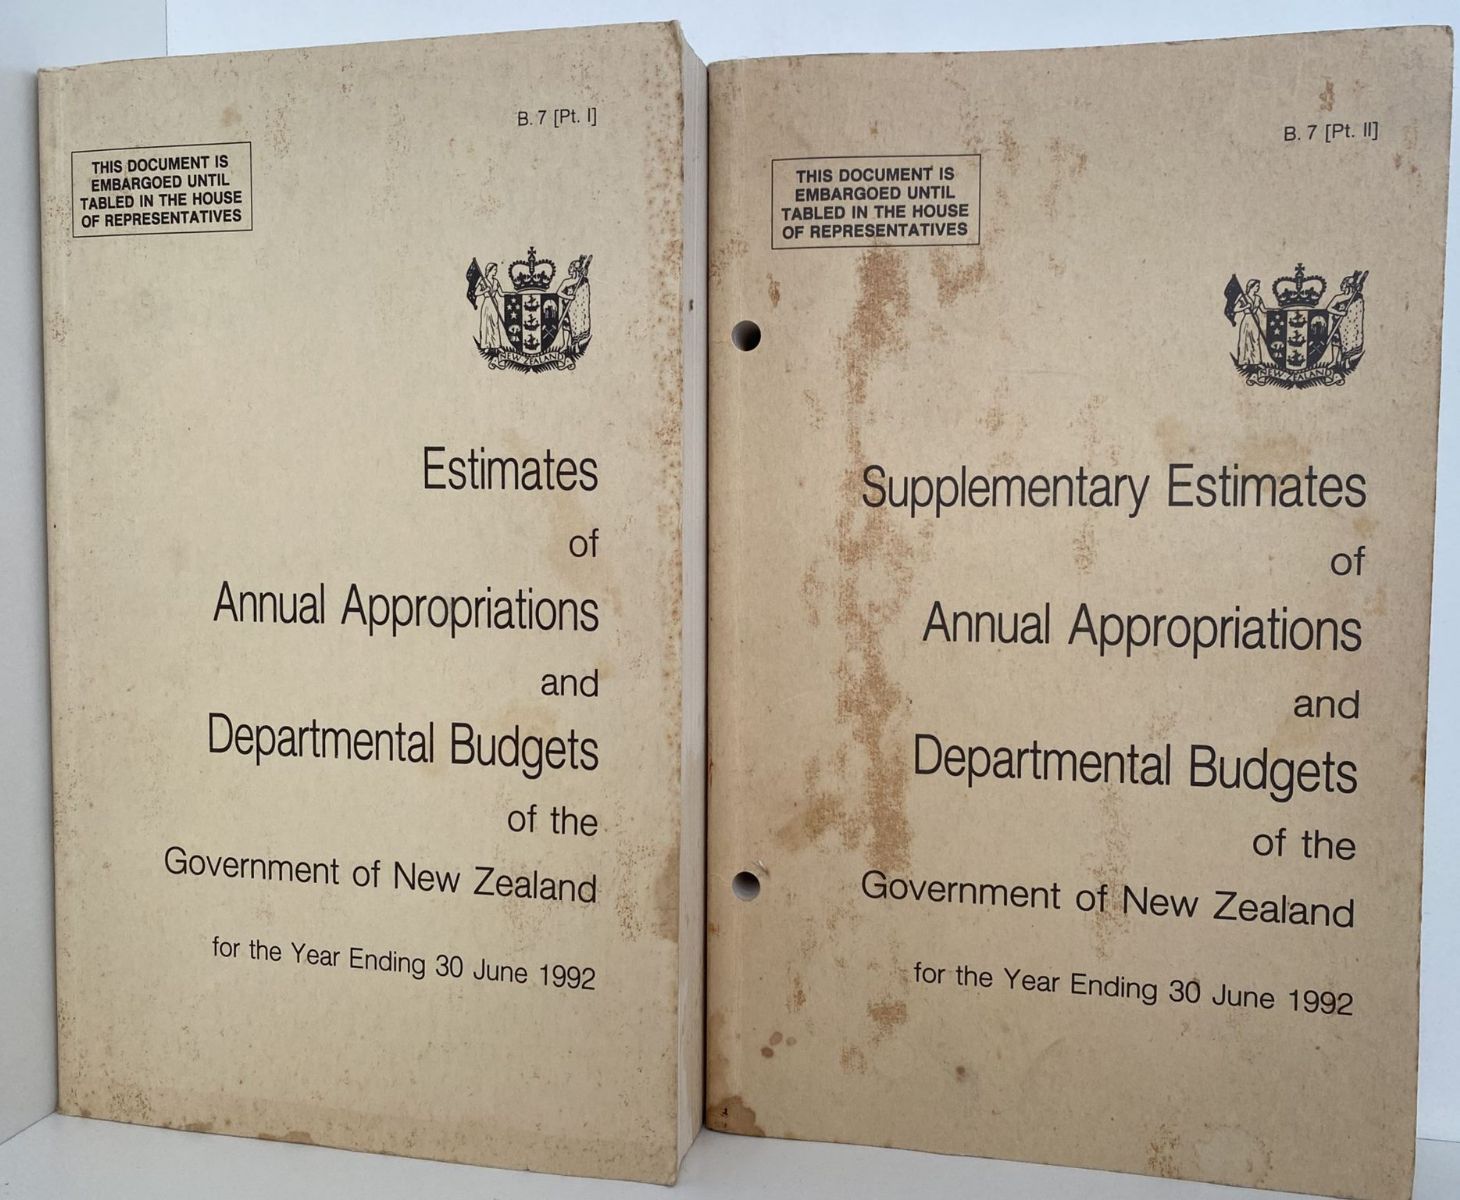 DEPARTMENTAL BUDGETS of the GOVERMENT of NEW ZEALAND June 1992